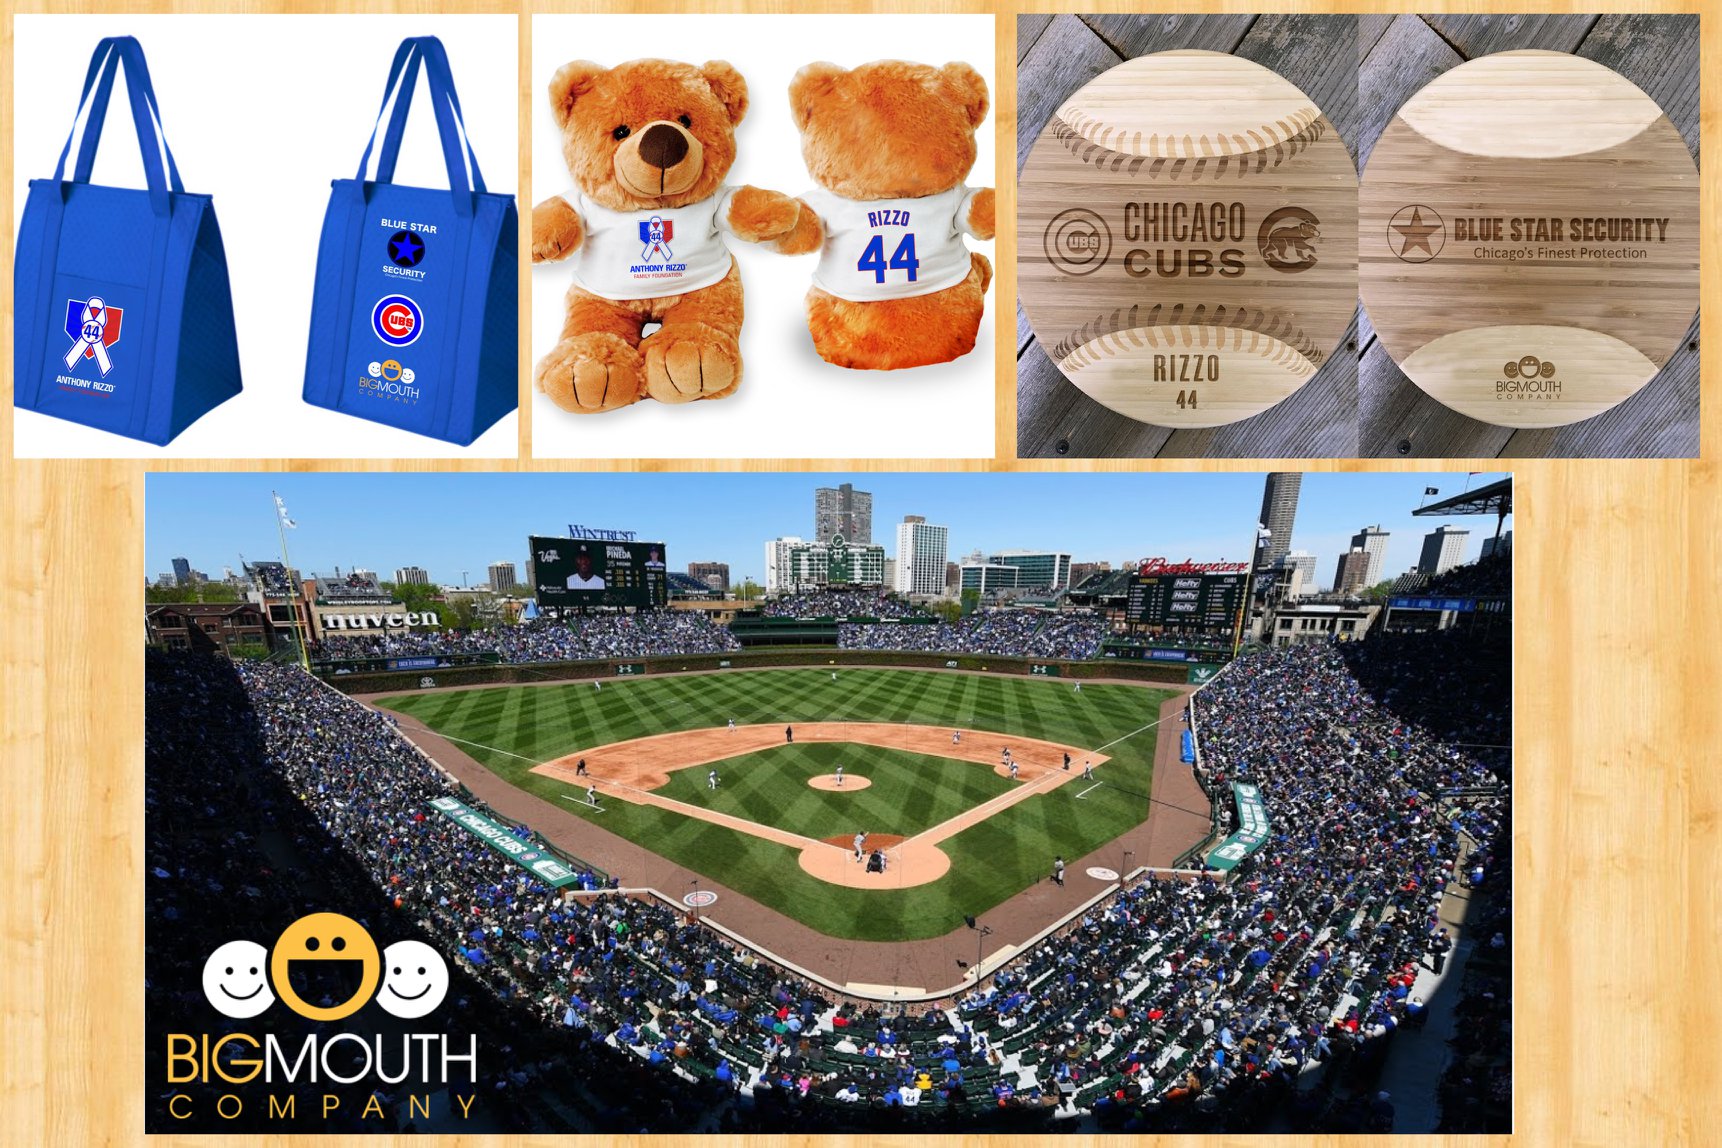 Blue Star Security Anthony Rizzo Family Foundation